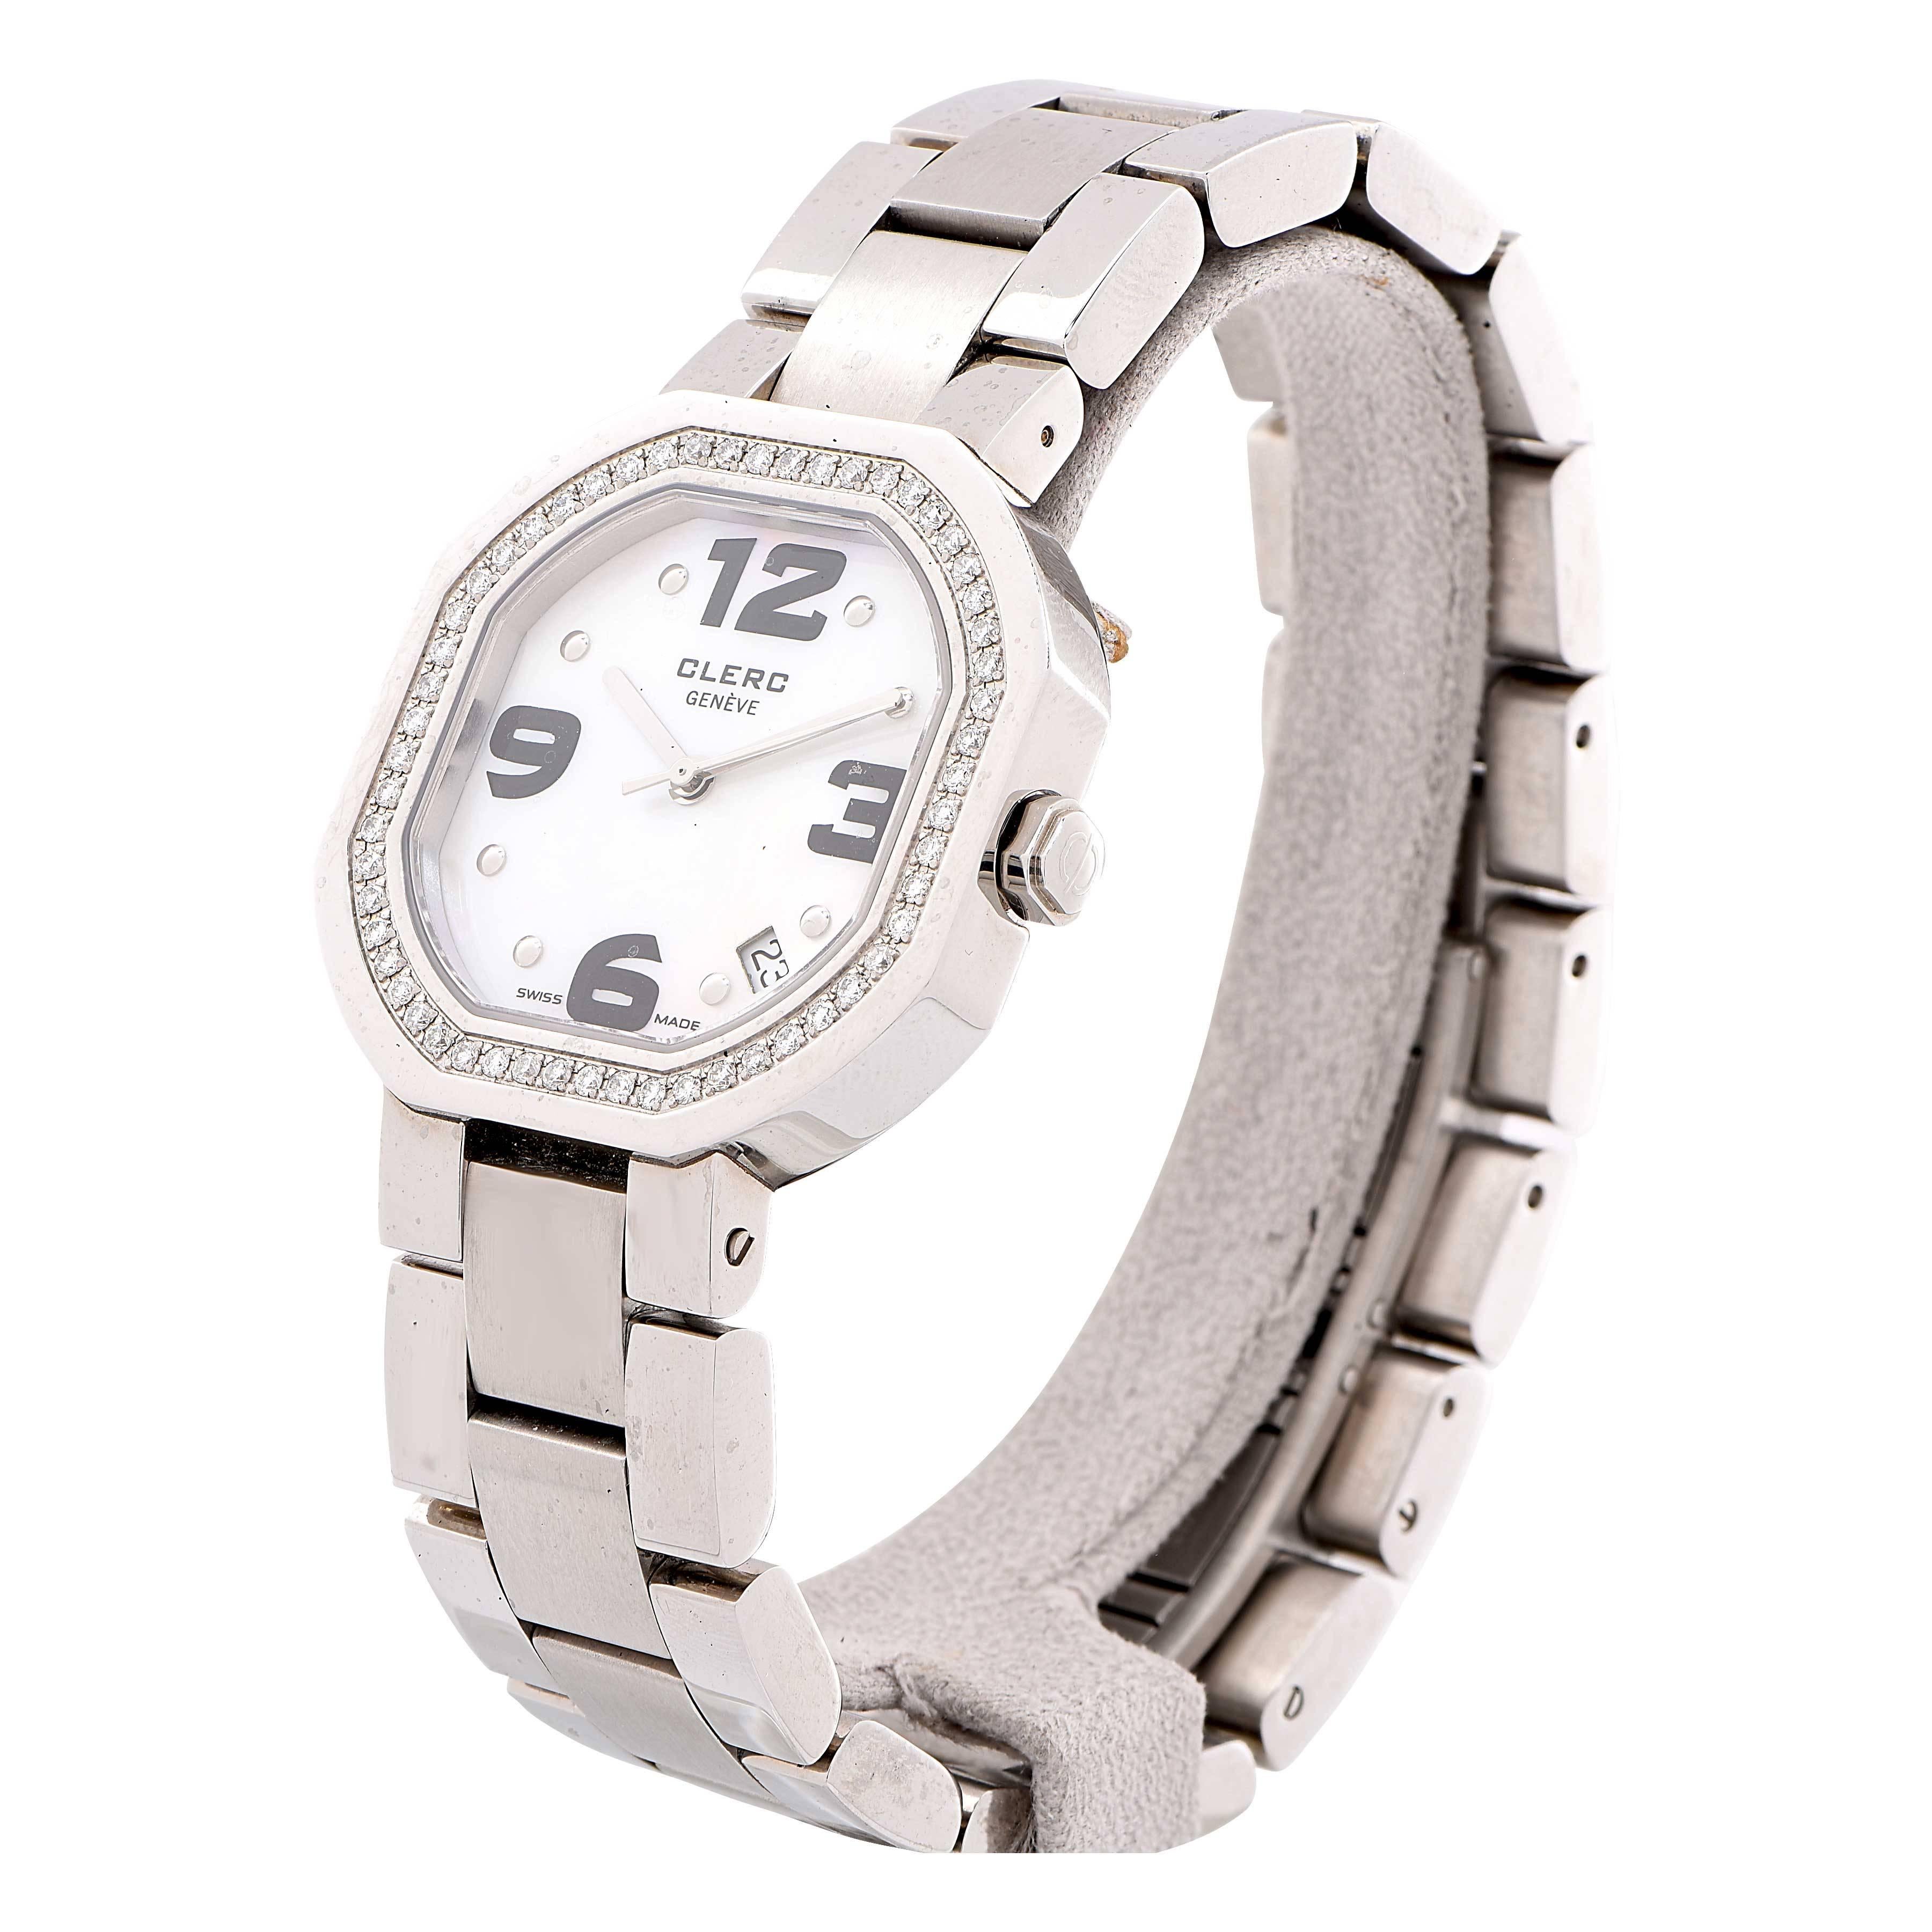 Clerc lady's stainless steel watch with mother of pearl dial and diamond bezel.
New in box and papers
Retail: $3,230
